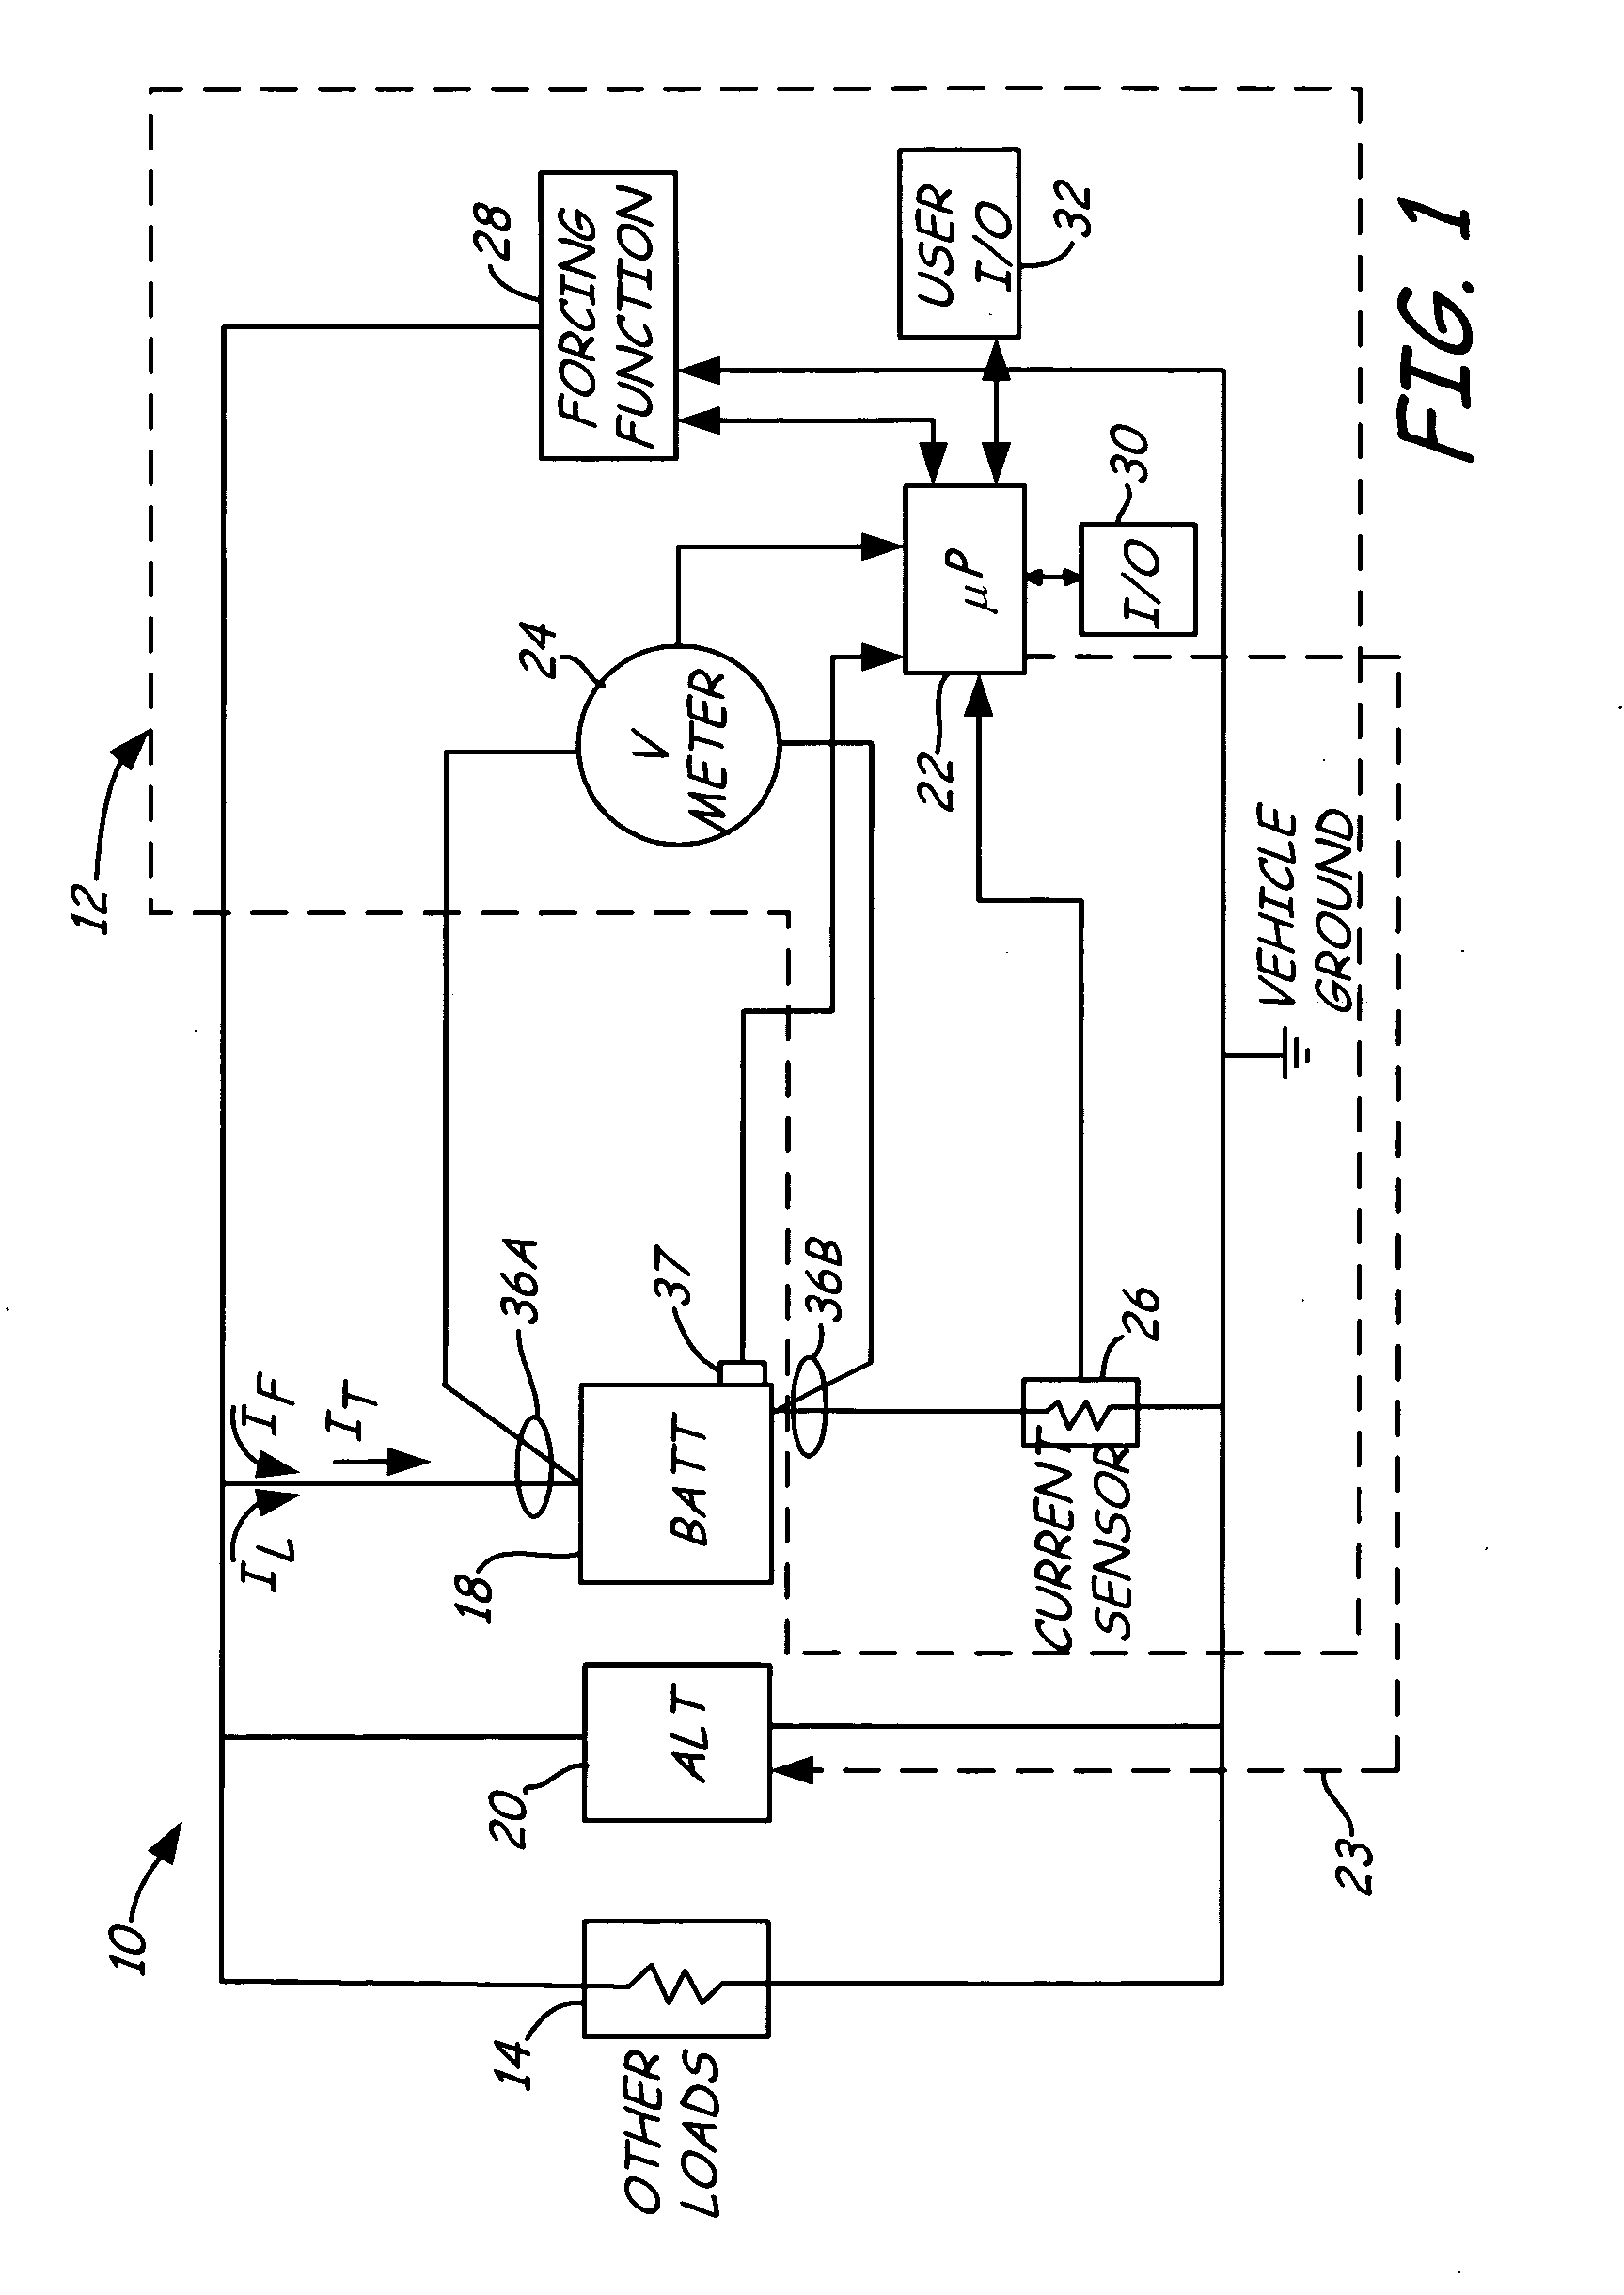 Shunt connection to a PCB of an energy management system employed in an automotive vehicle